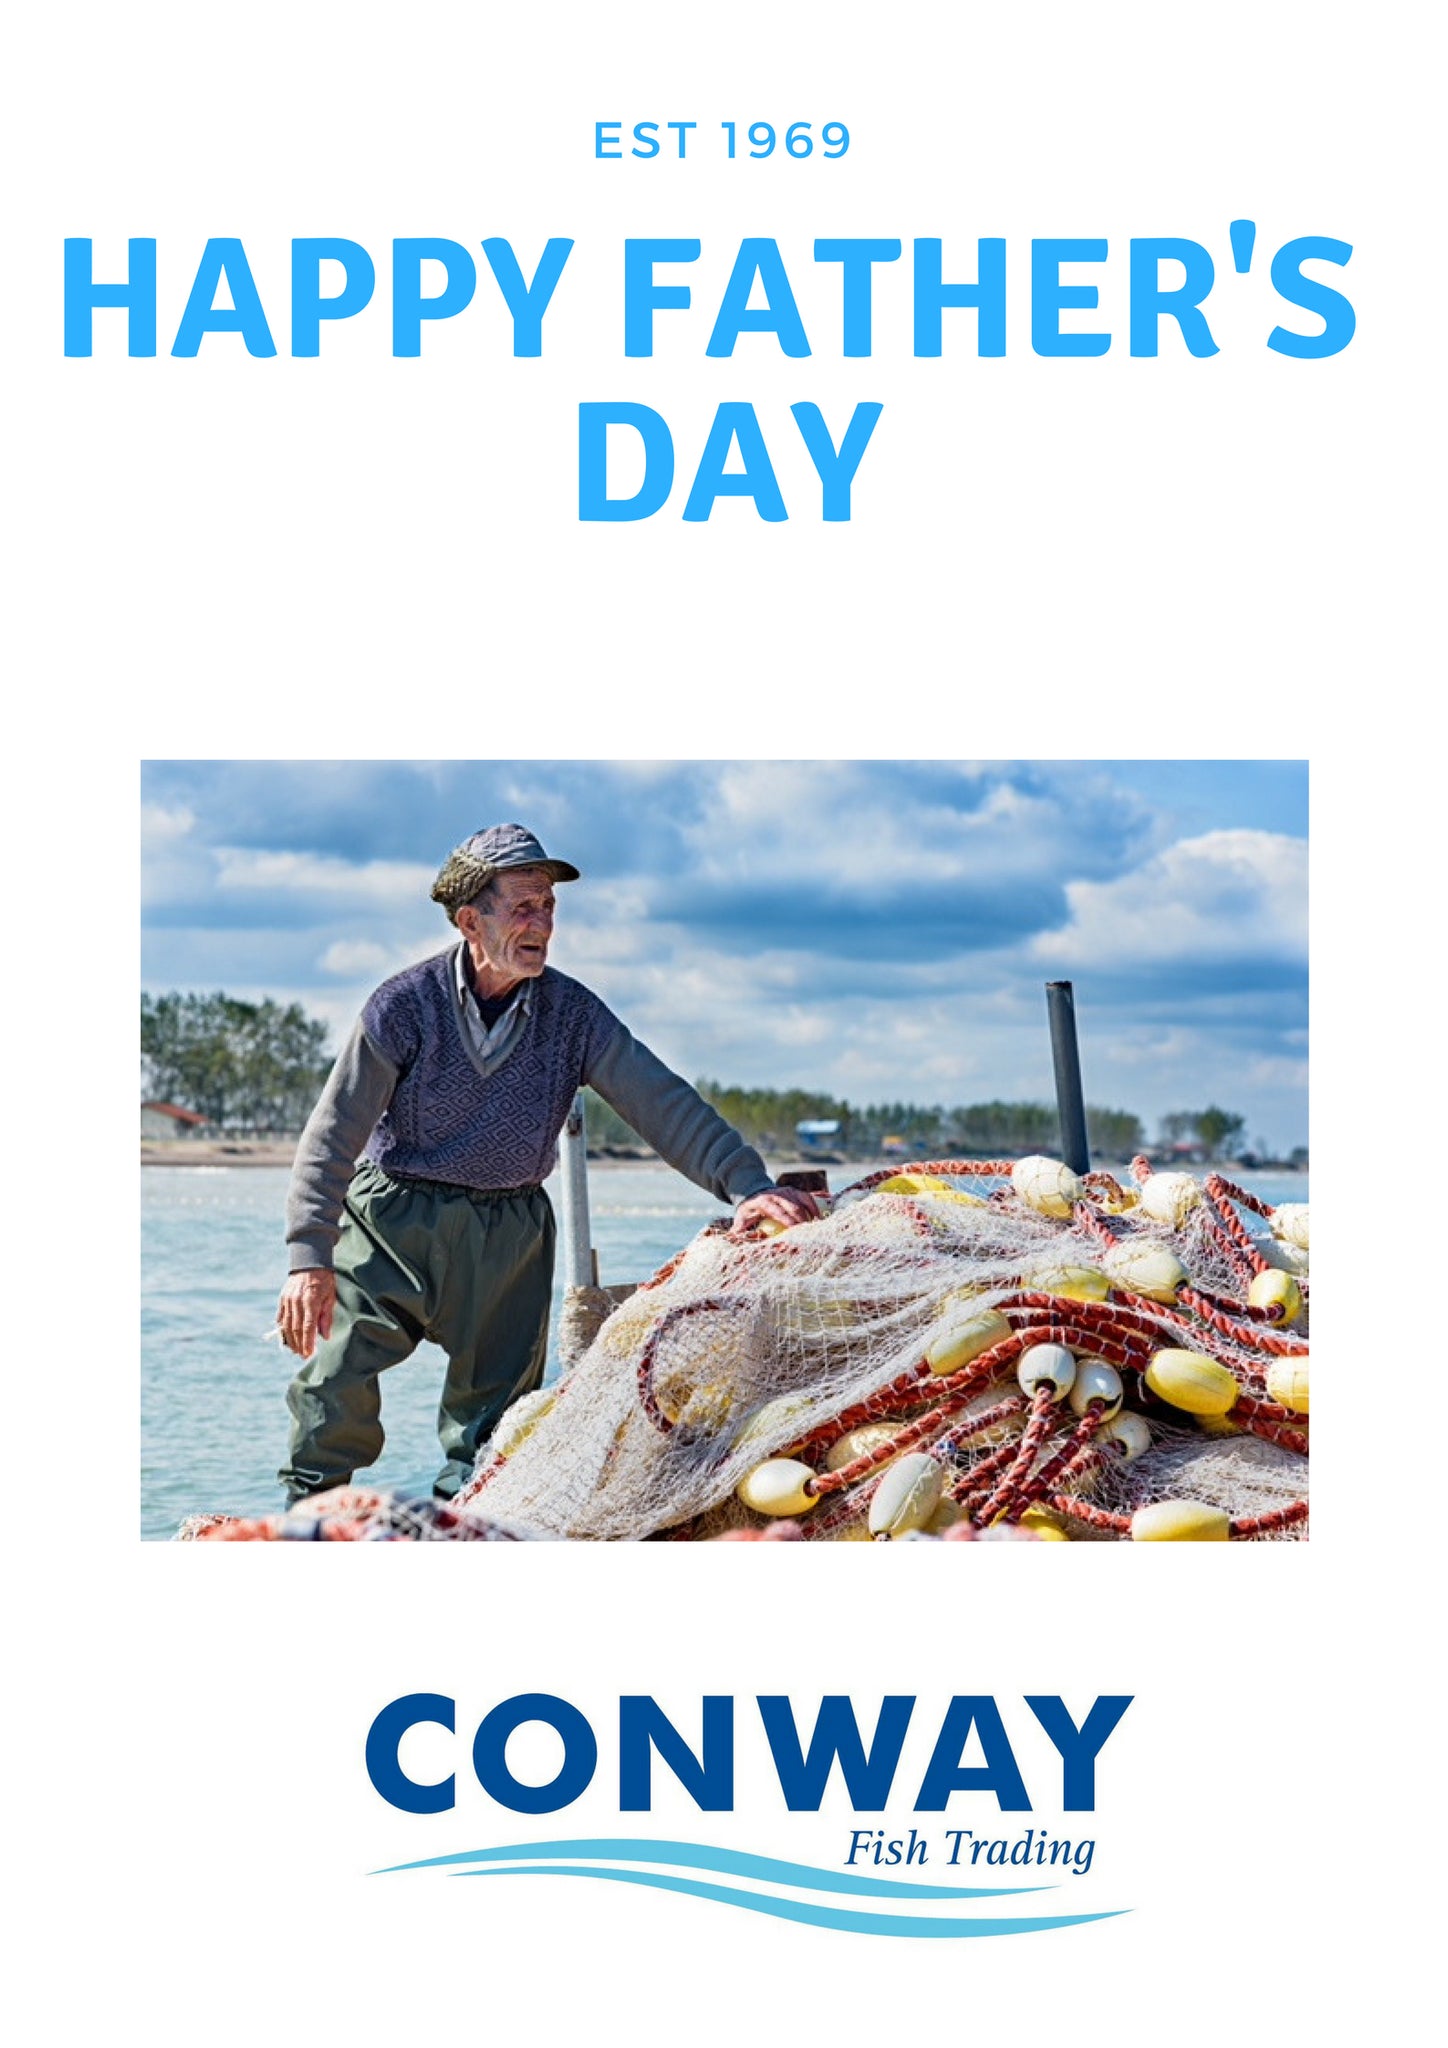 Conway's celebrating Father's Day